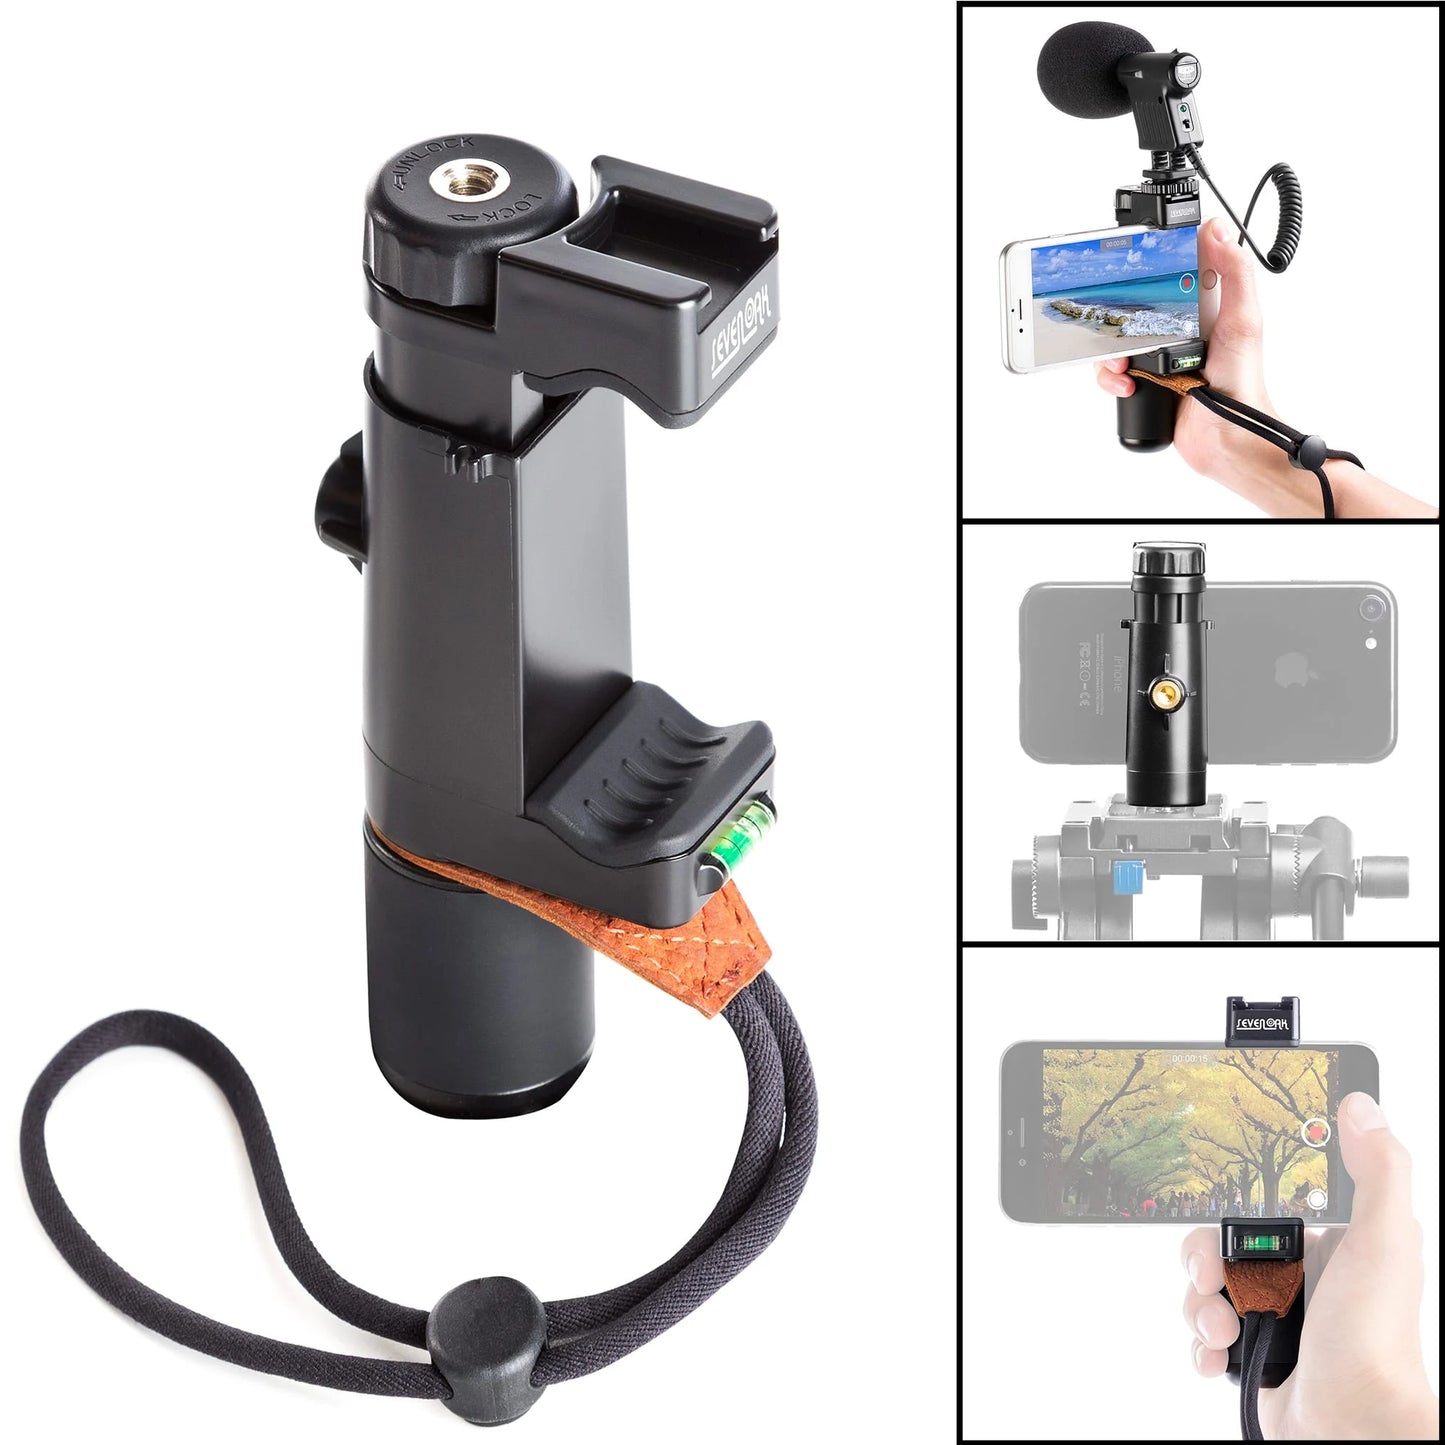 Sevenoak SK-PSC1 phone holder with cold shoe, grip handle and tripod mount